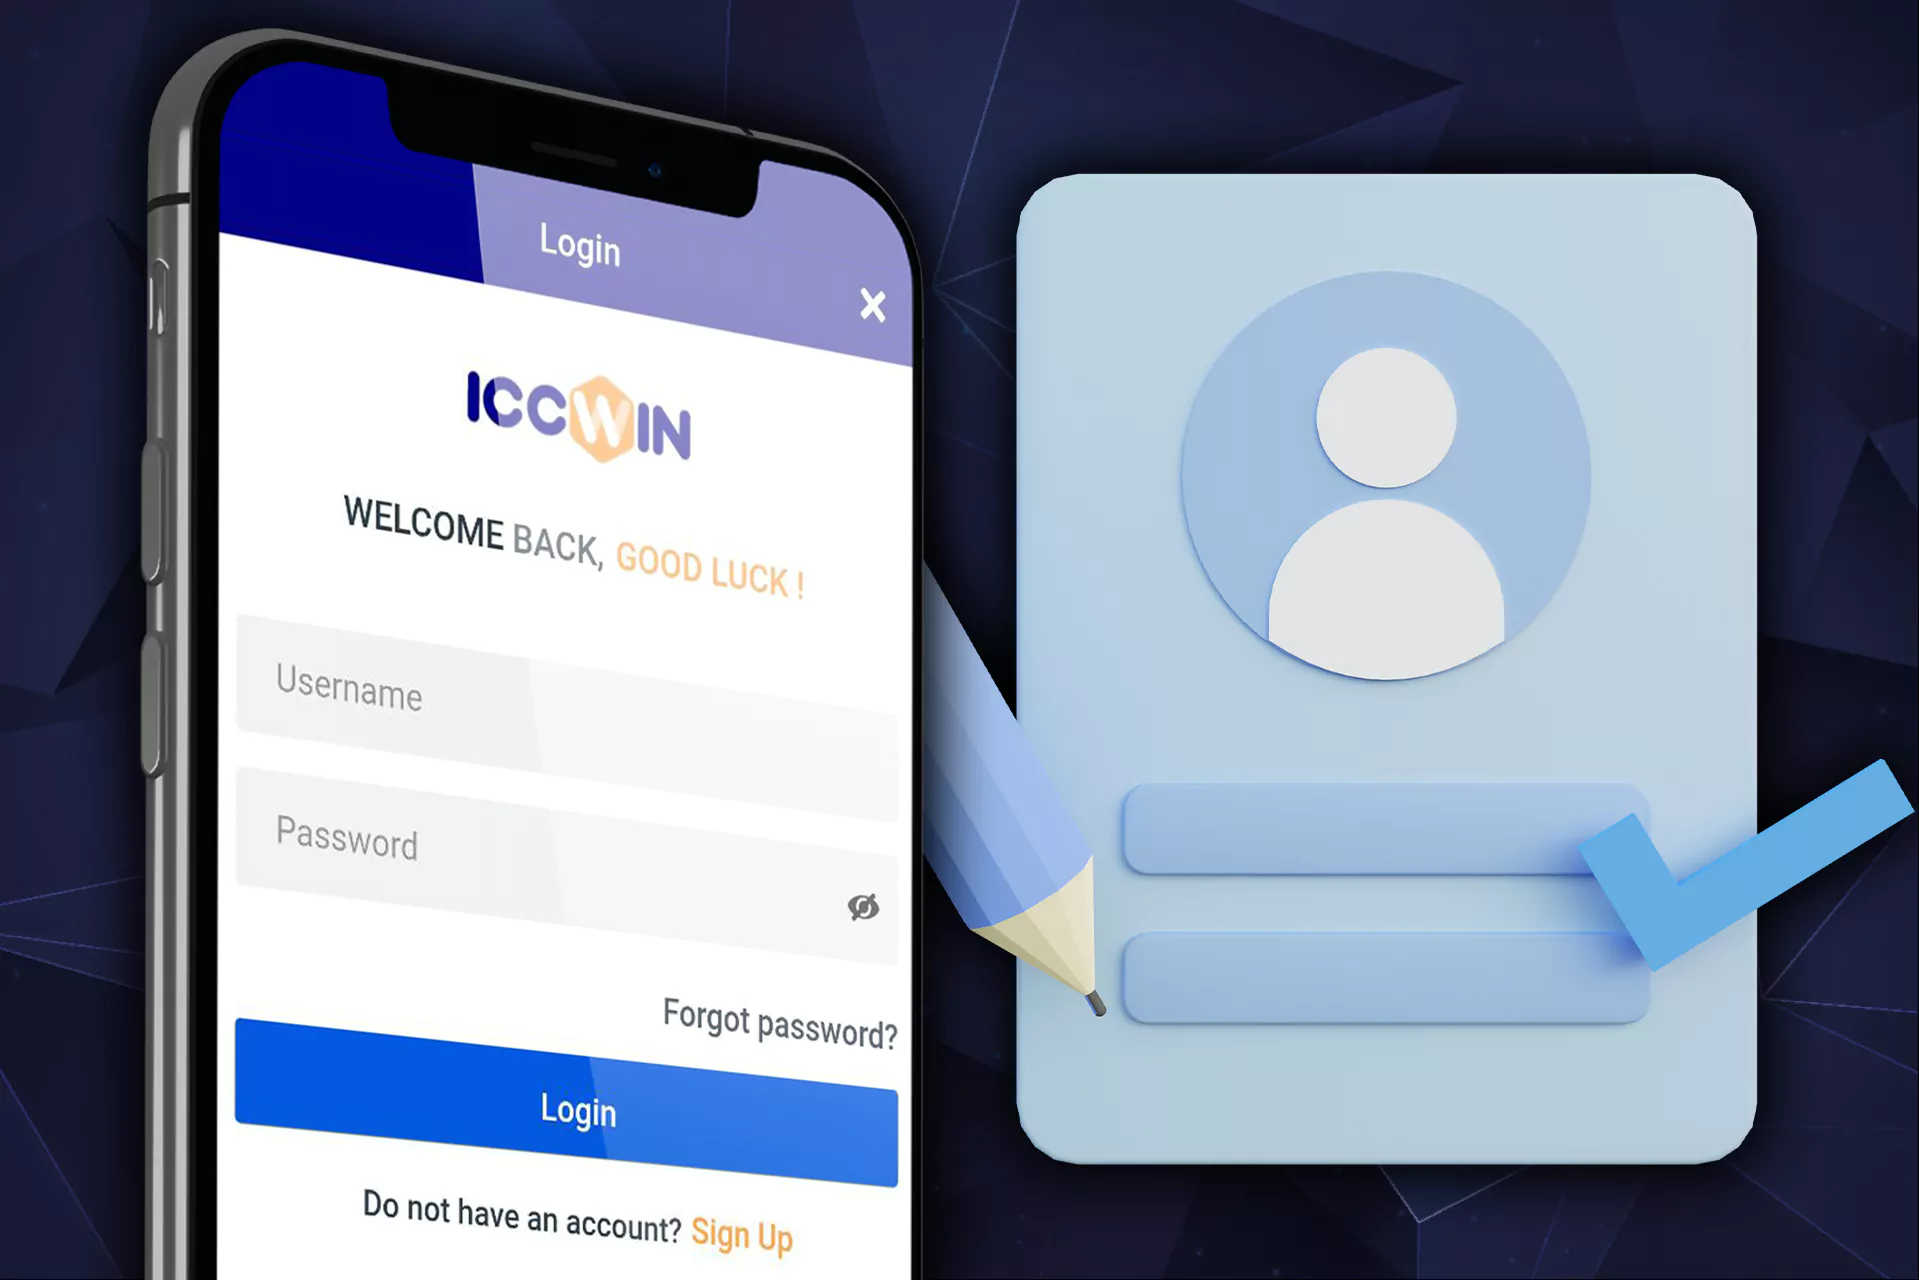 Enter your username and password and log in to ICCWIN.